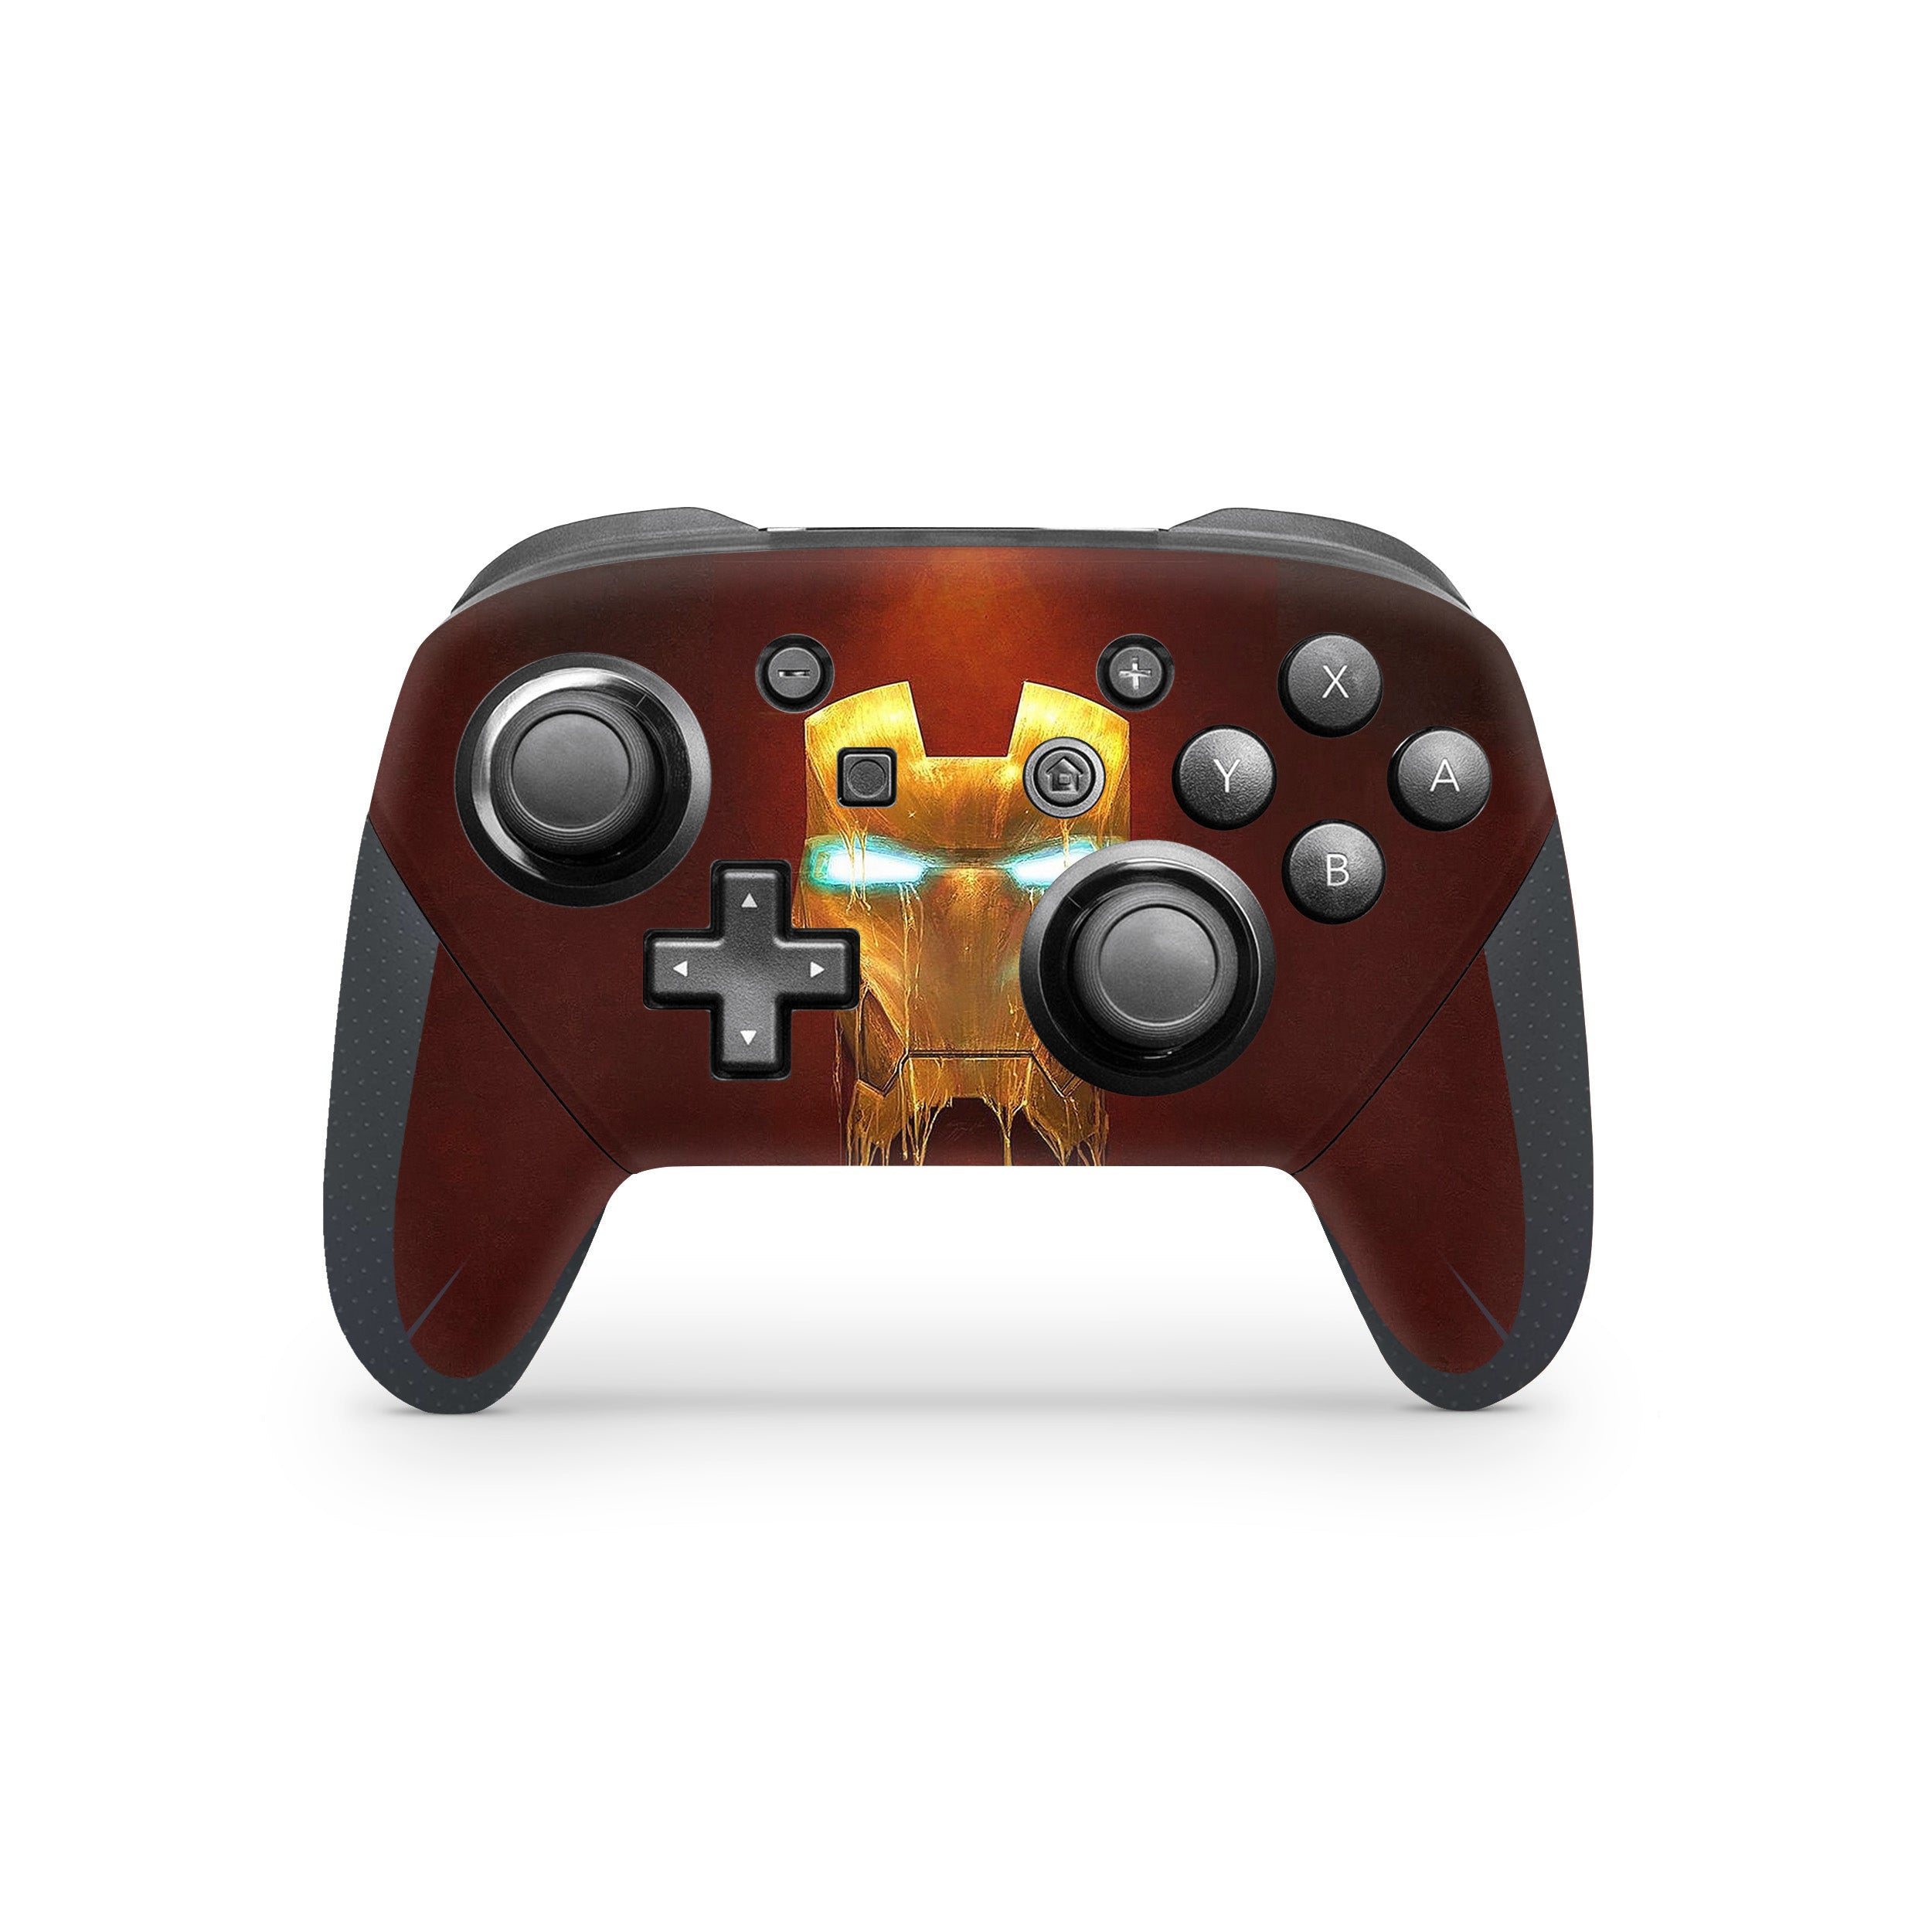 A video game skin featuring a Marvel Iron Man design for the Switch Pro Controller.